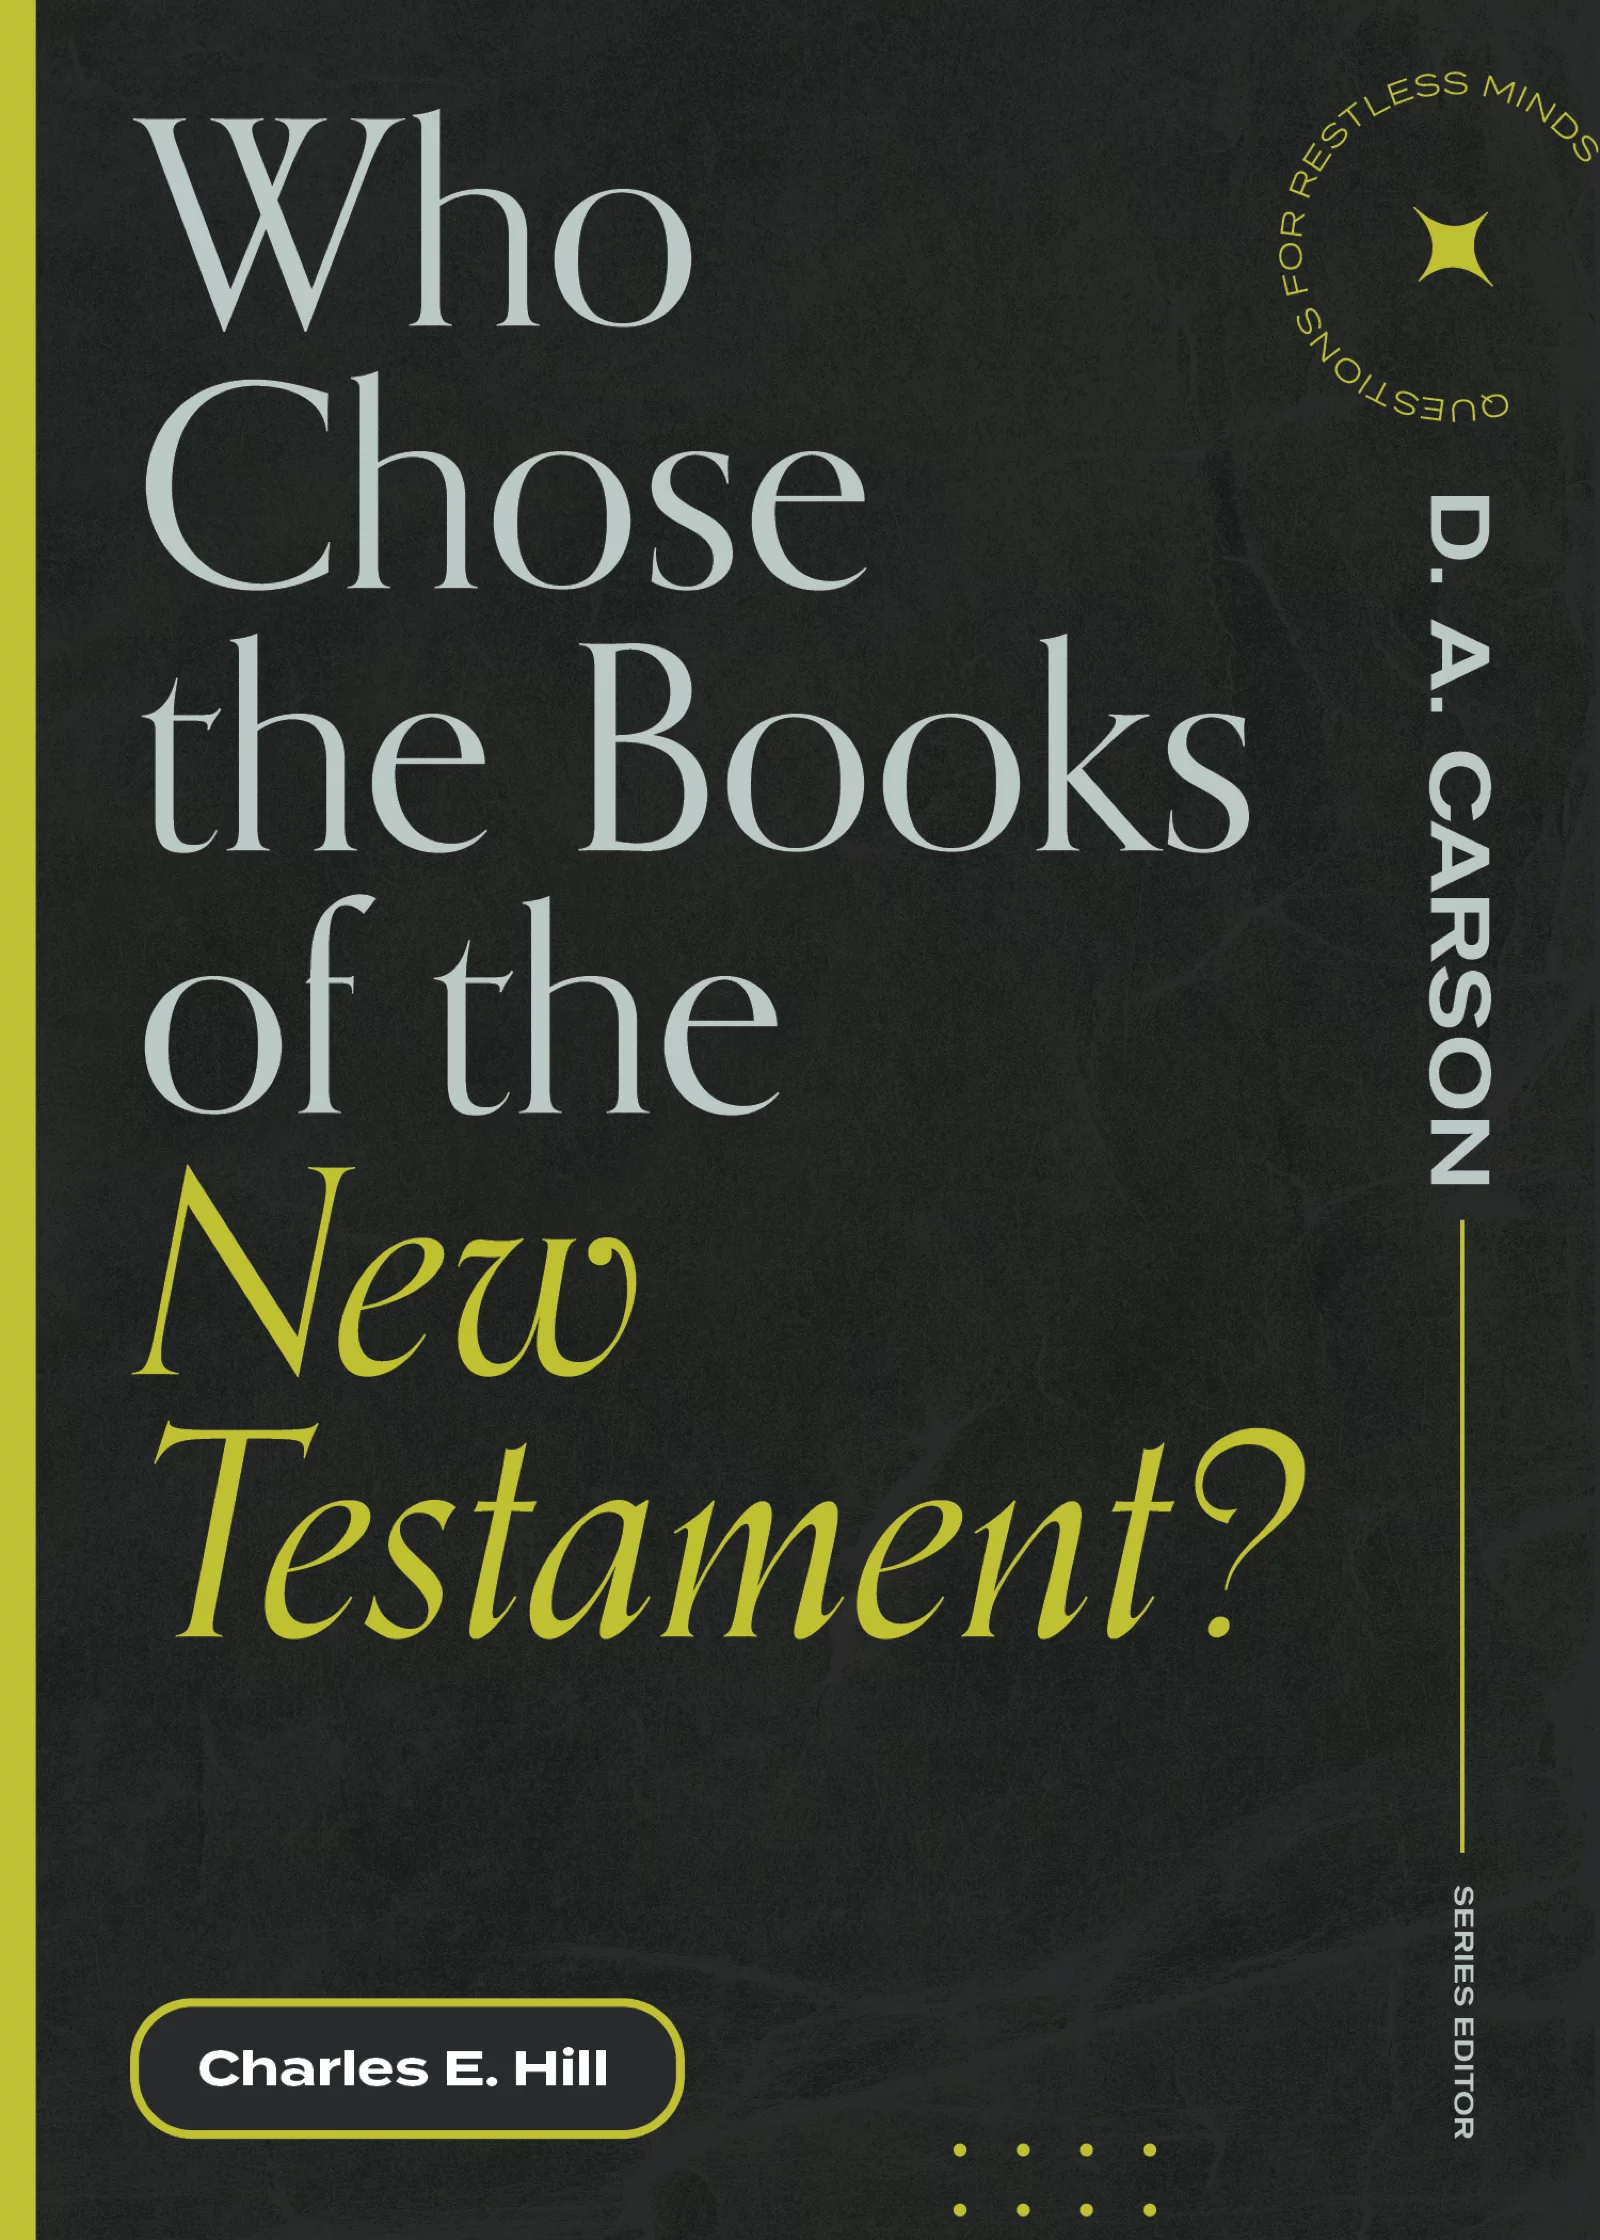  2022/08/Who-chose-the-Books-of-the-New-Testament.webp 